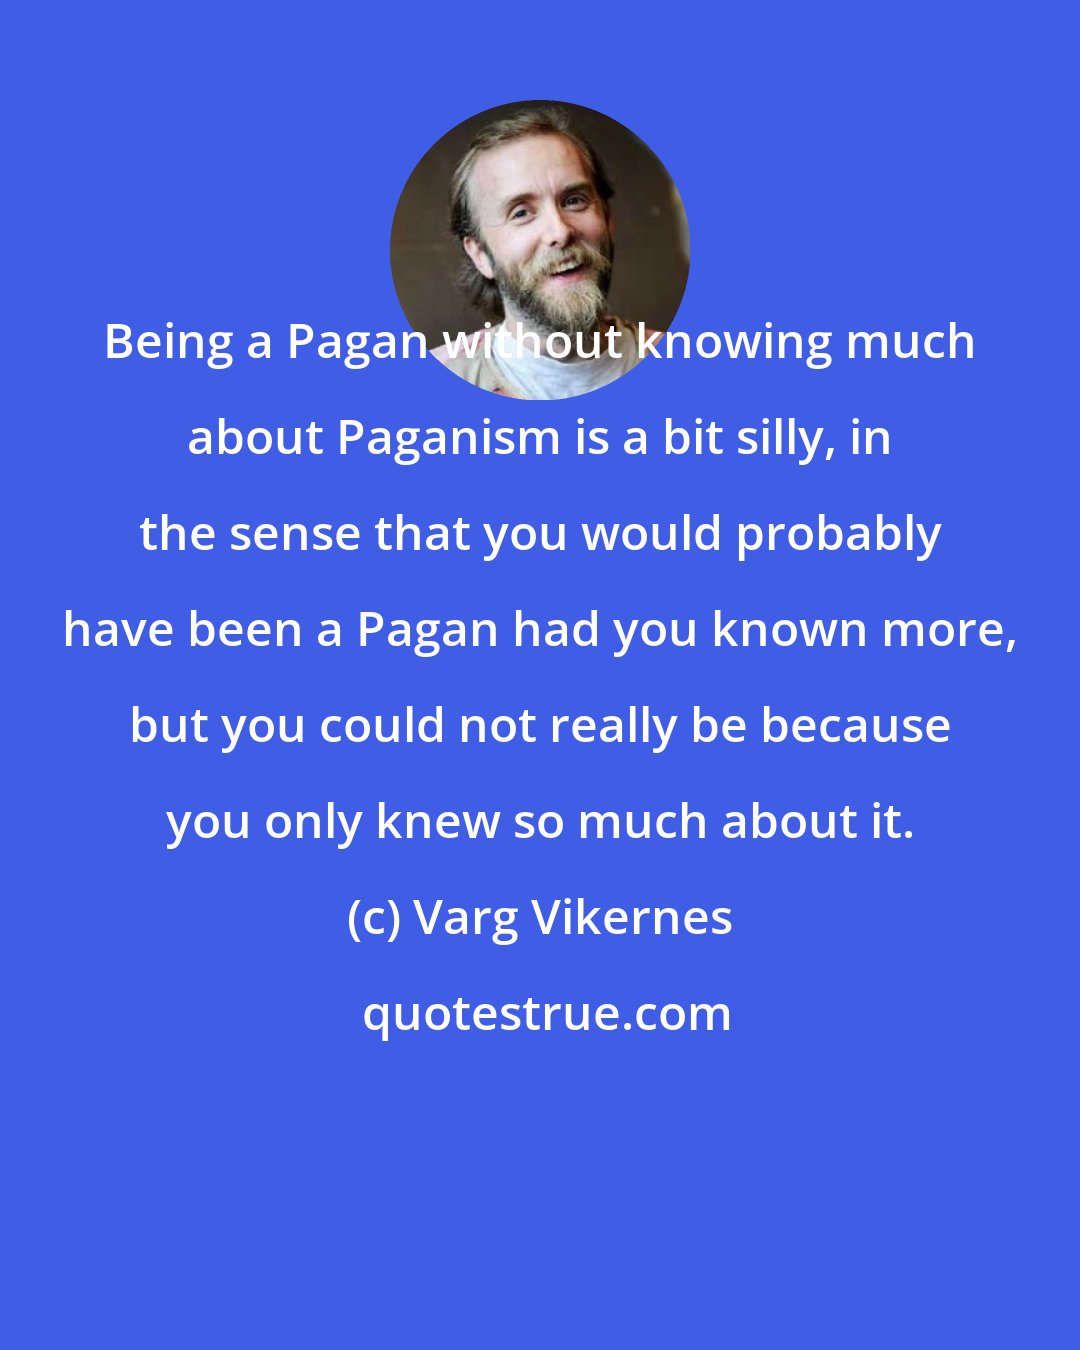 Varg Vikernes: Being a Pagan without knowing much about Paganism is a bit silly, in the sense that you would probably have been a Pagan had you known more, but you could not really be because you only knew so much about it.